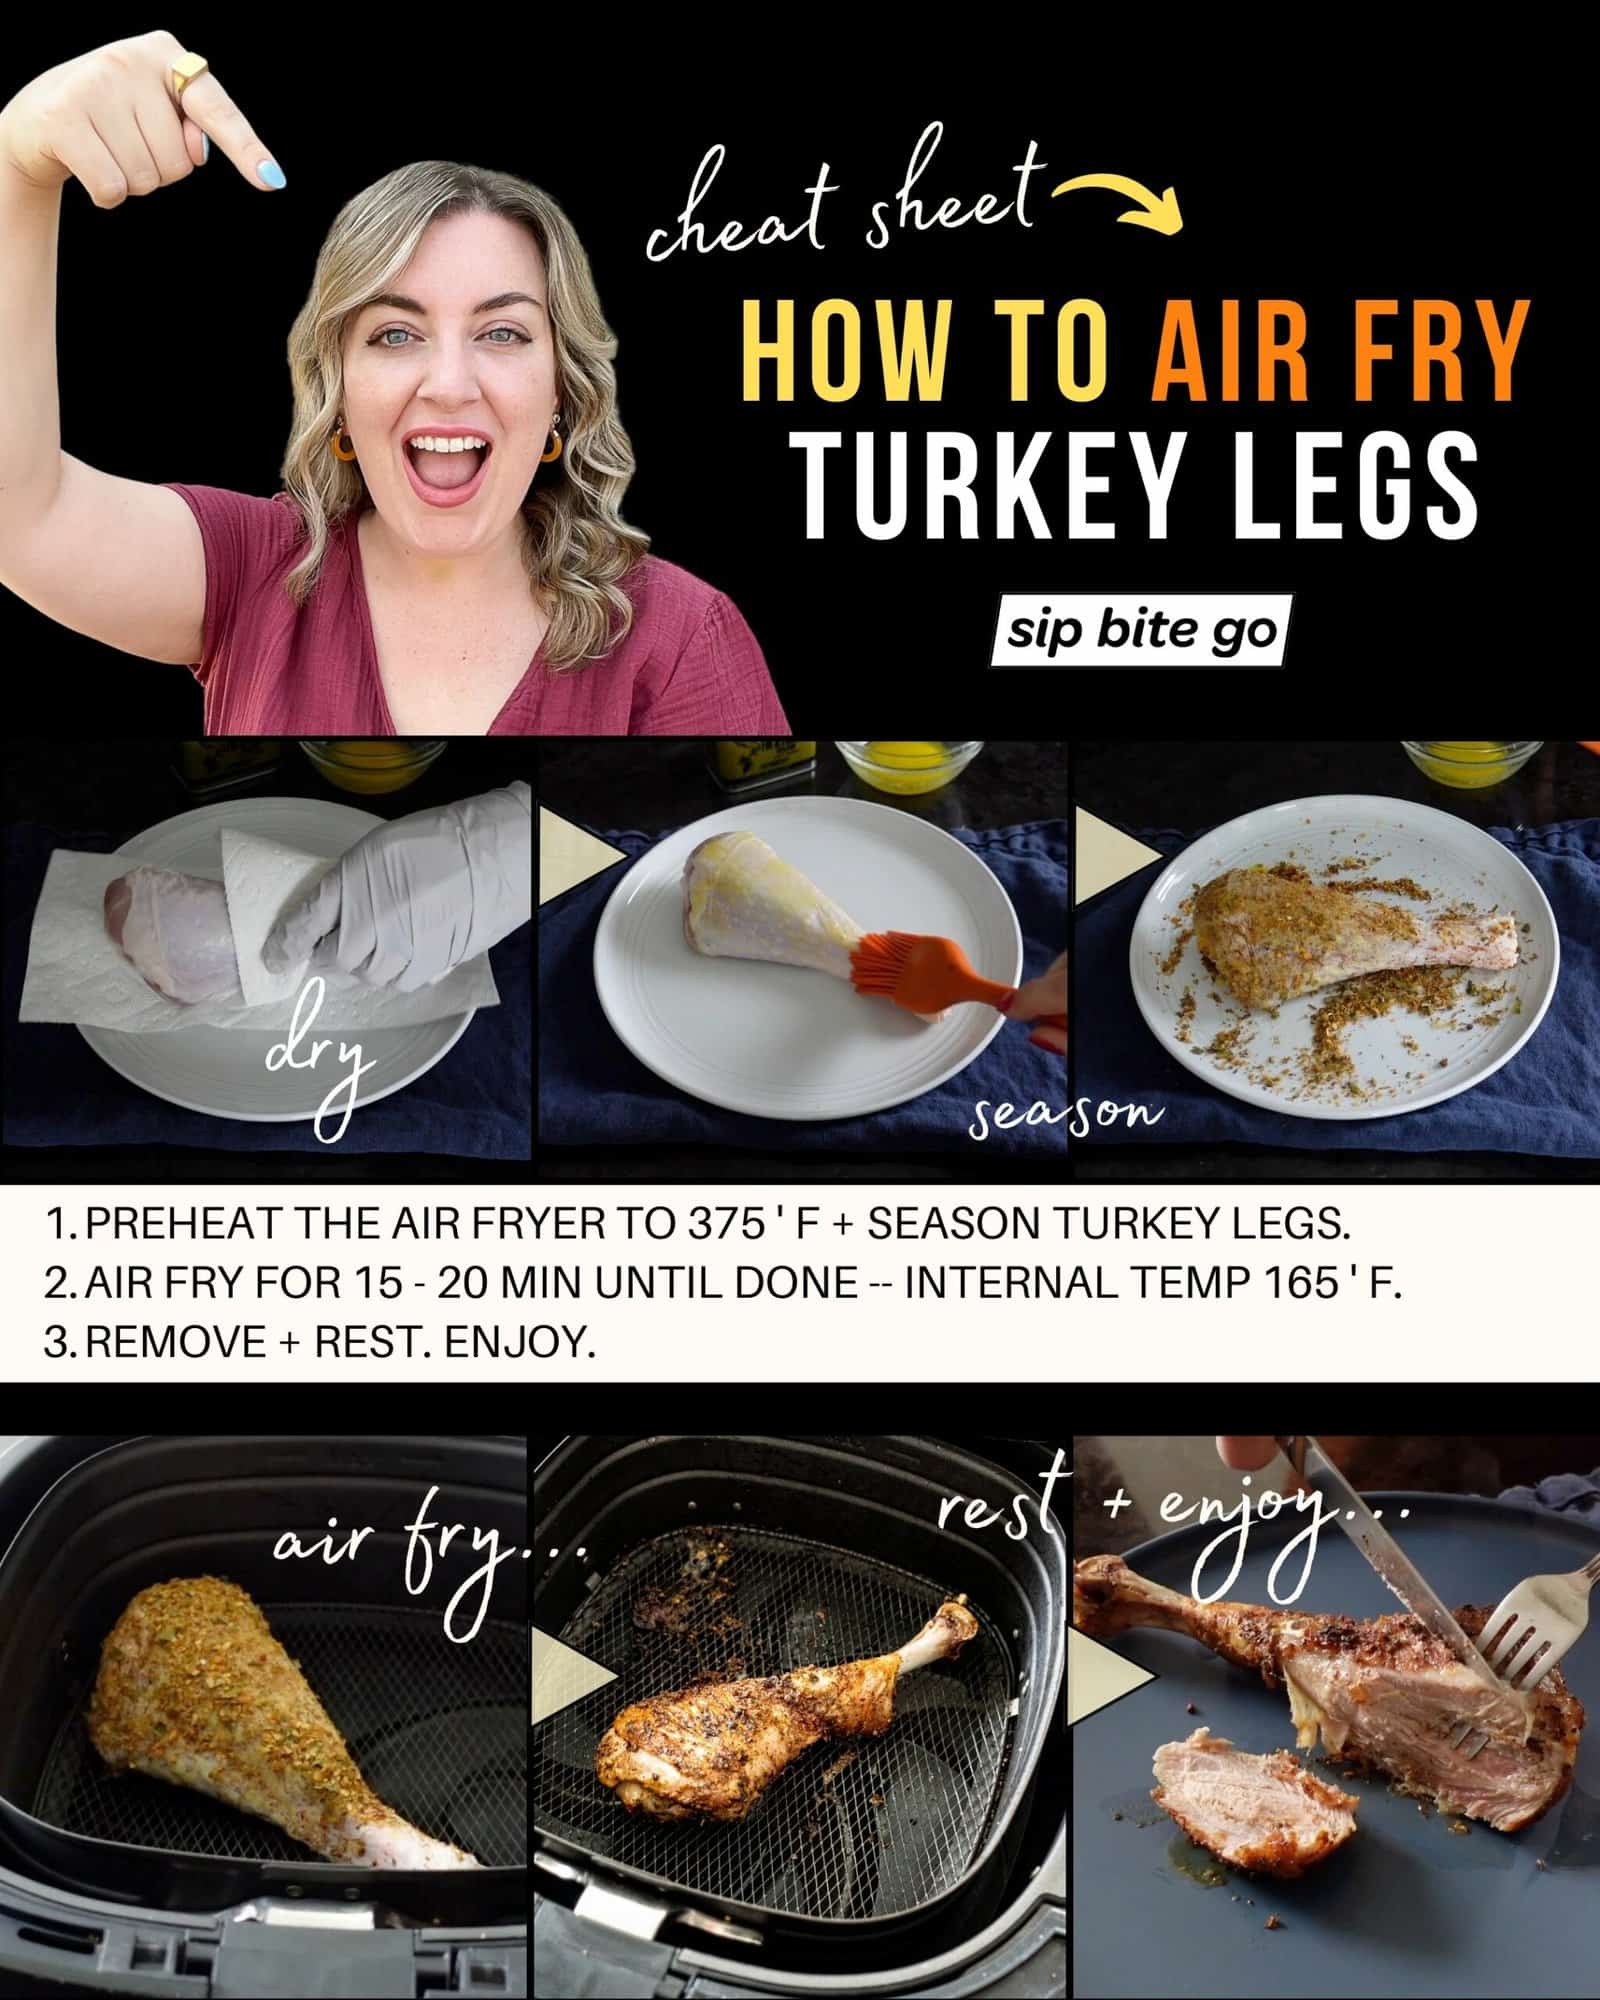 Infographic demonstrating how to cook a turkey leg in air fryer with Jenna Passaro food blogger from Sip Bite Go